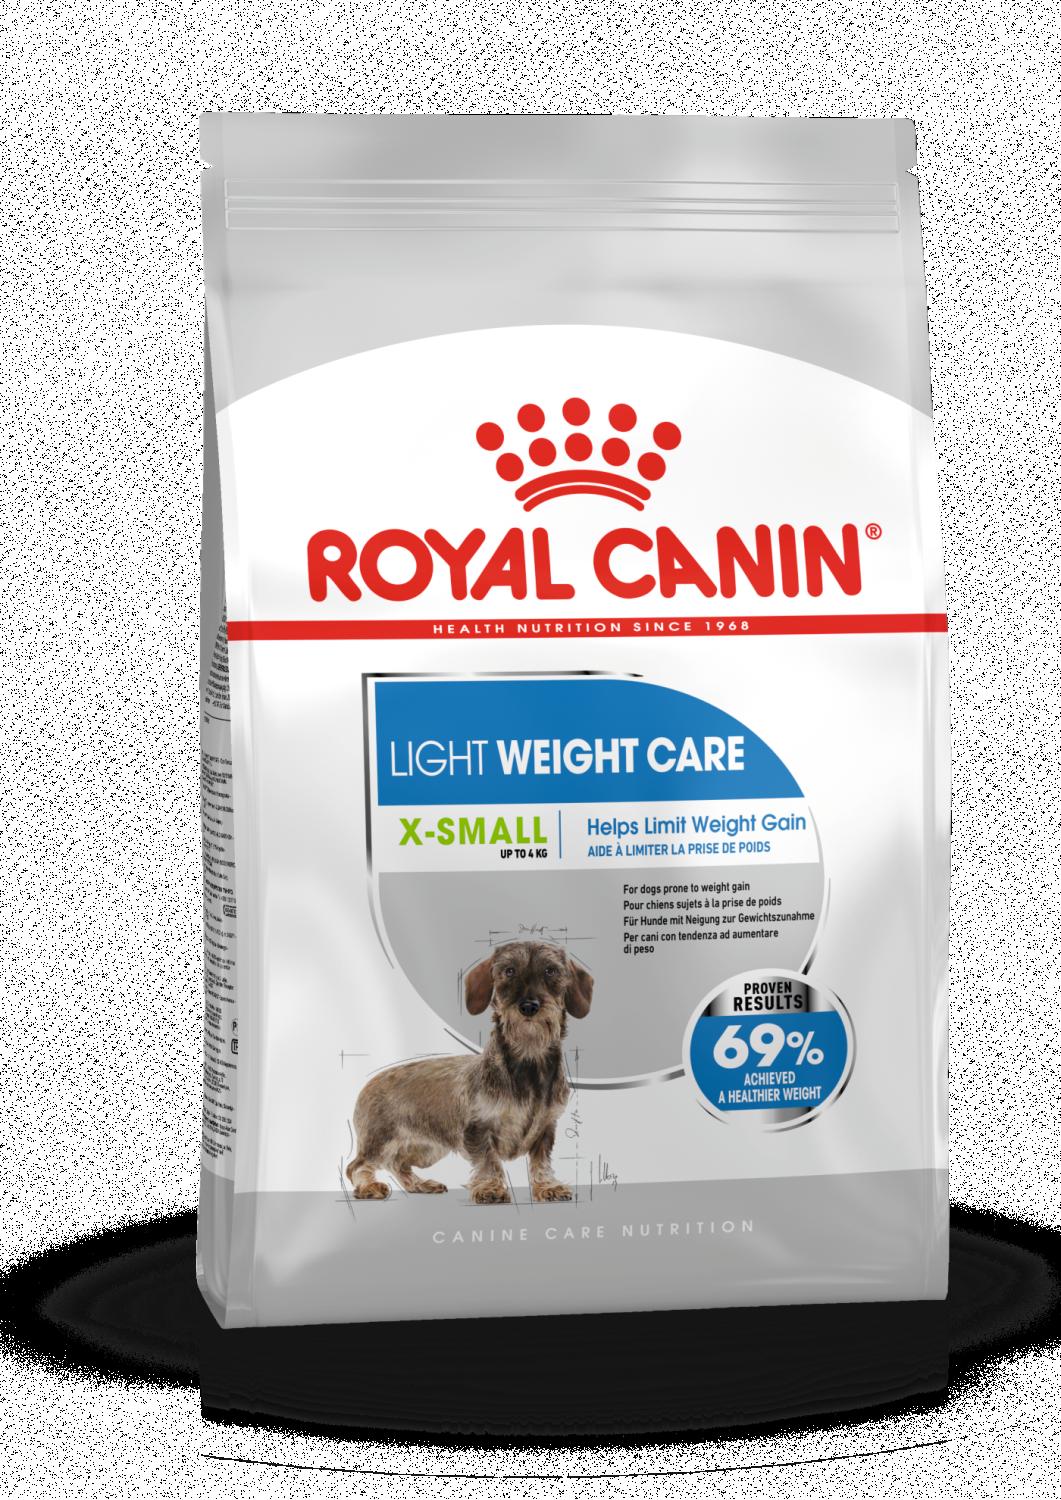 Royal Canin Light Weight Care X-Small 1,5kg